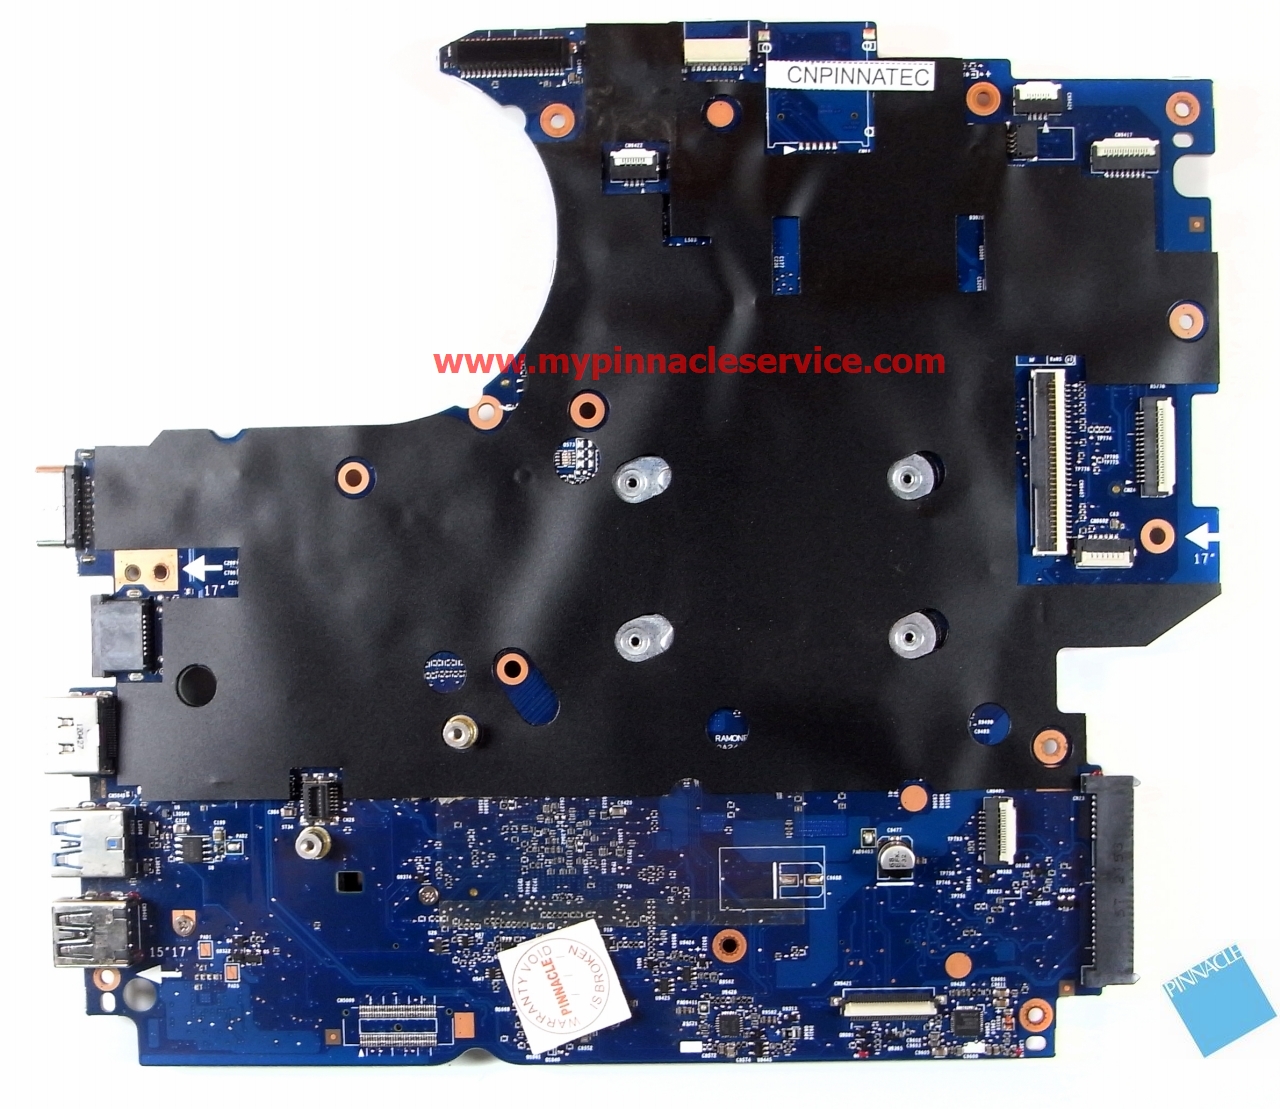 646246-001-658341-001-motherboard-for-hp-probook-4530s-4730s-6050a2465501-r0012759.jpg